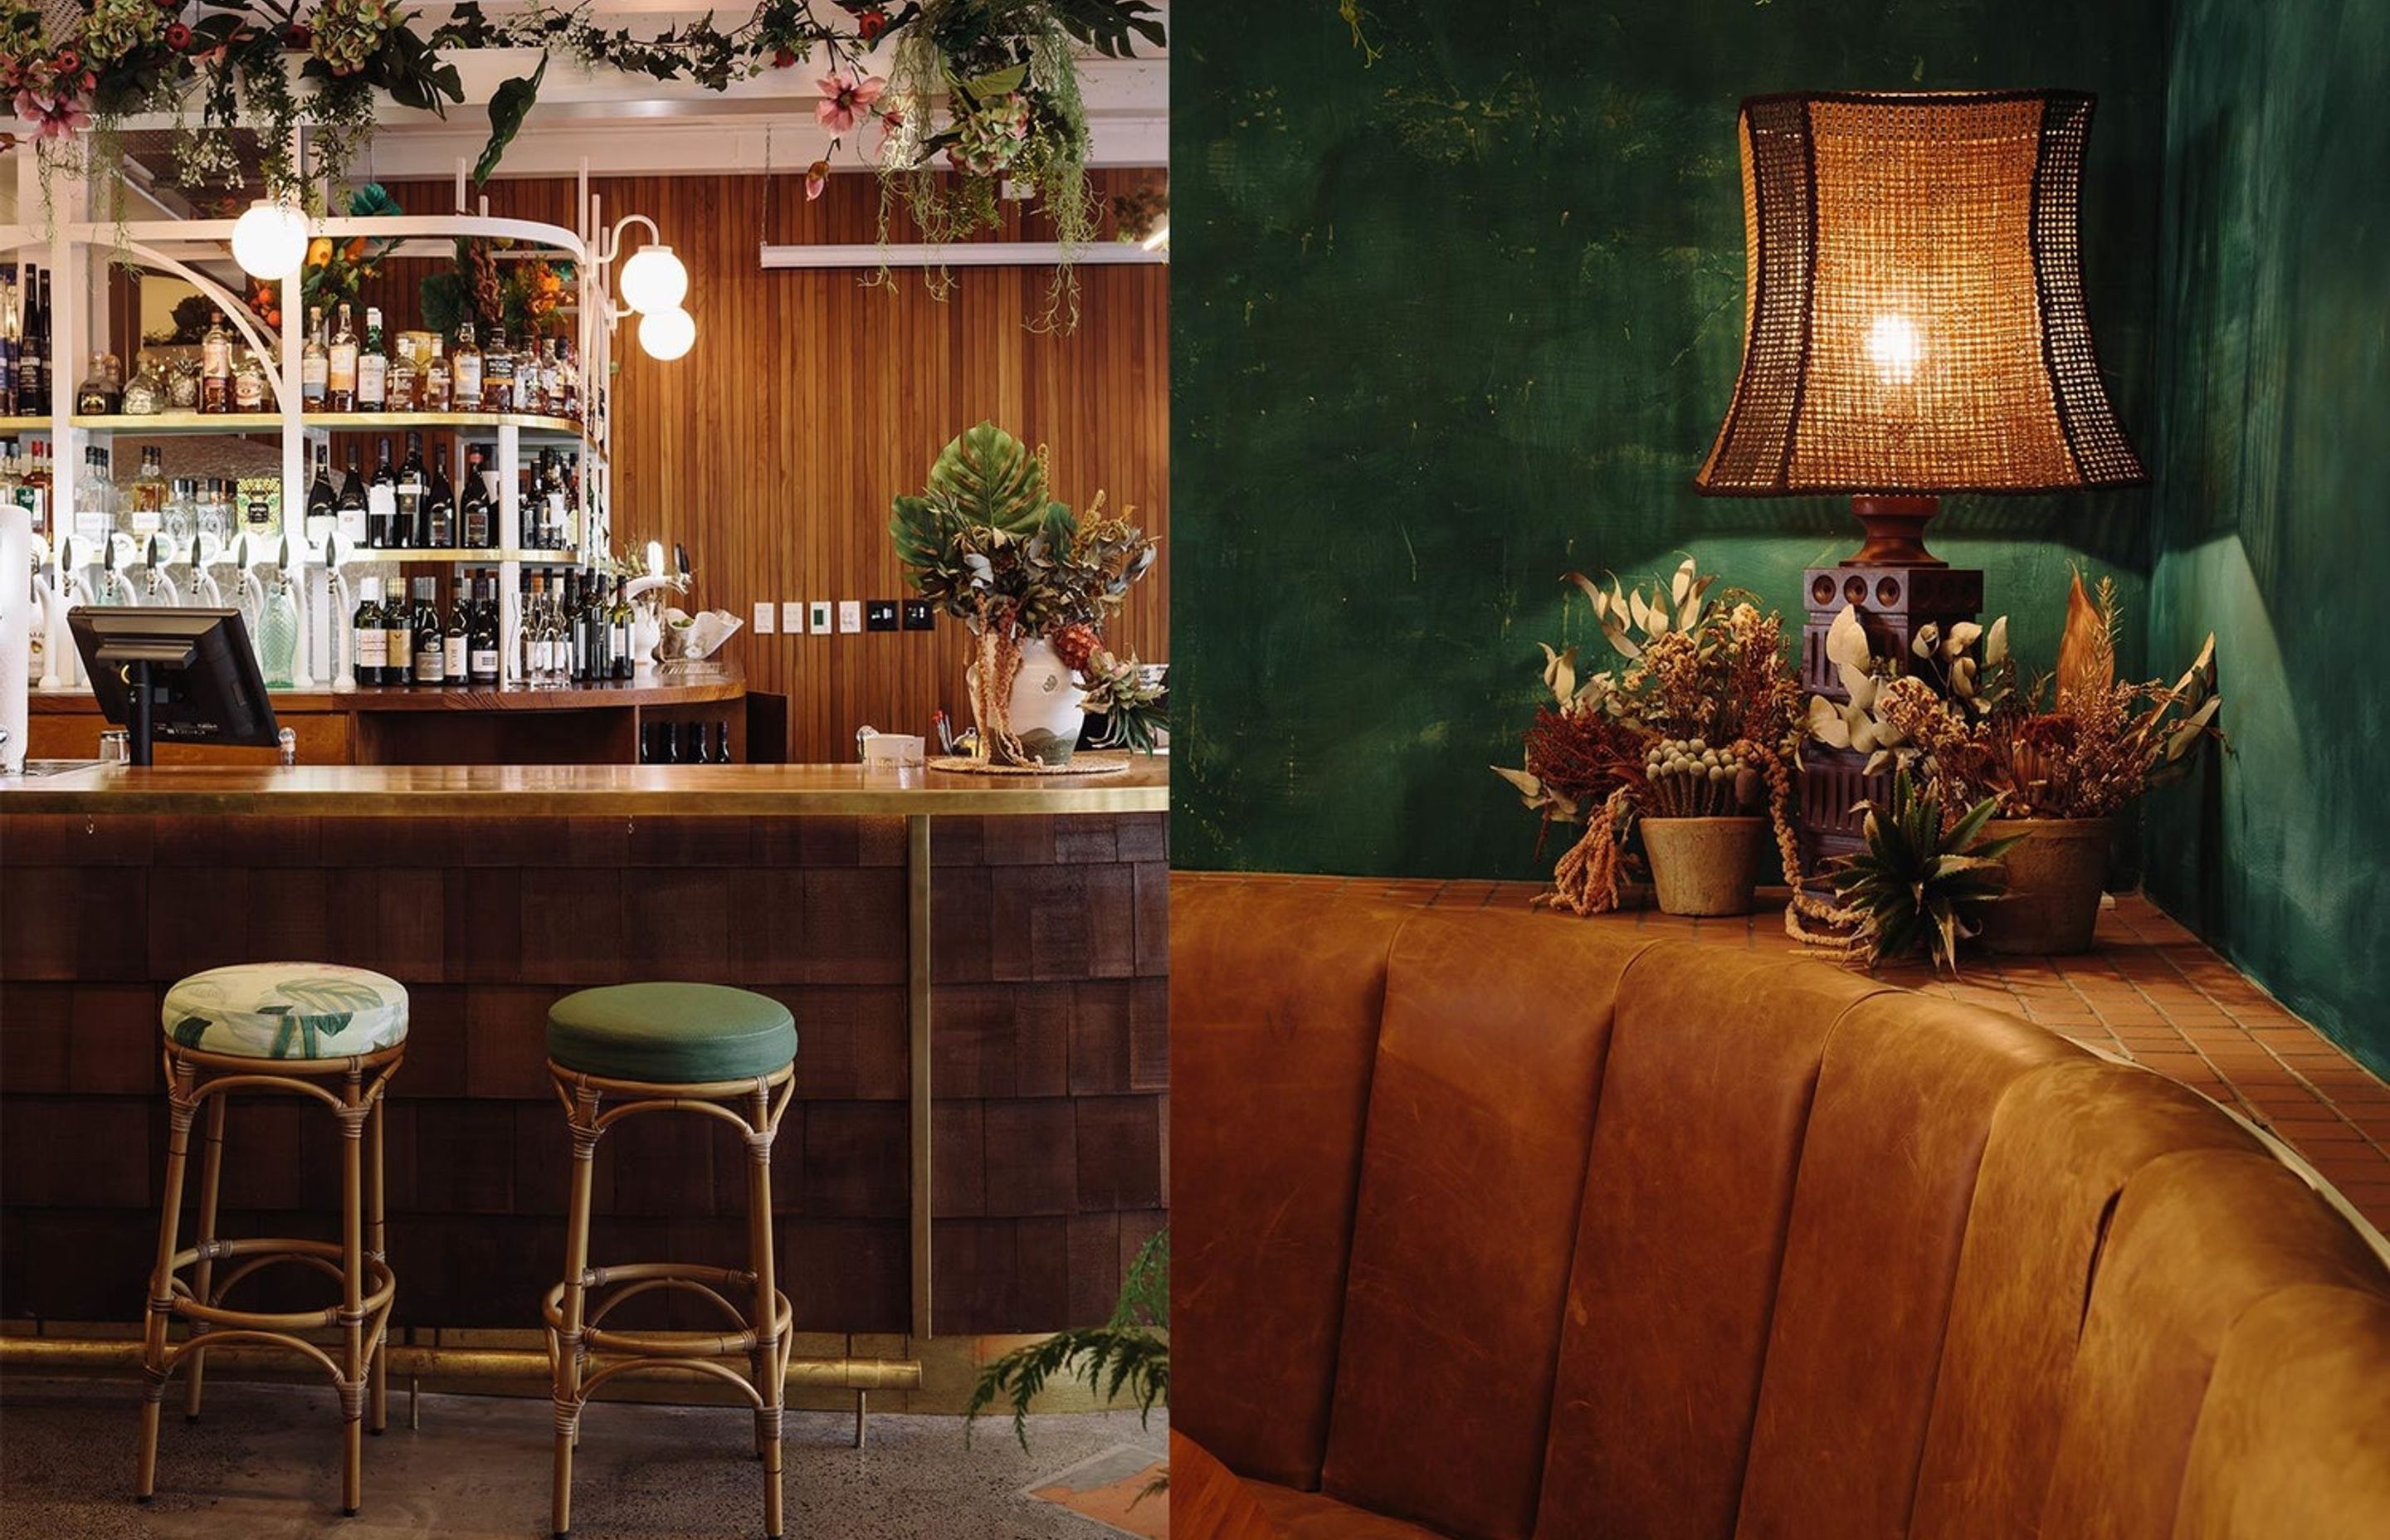 Located in Auckland's Viaduct precinct, The Lula Inn is a South Pacific-style eatery that combines equal measures of luxe, rustic and tropical in its interior.